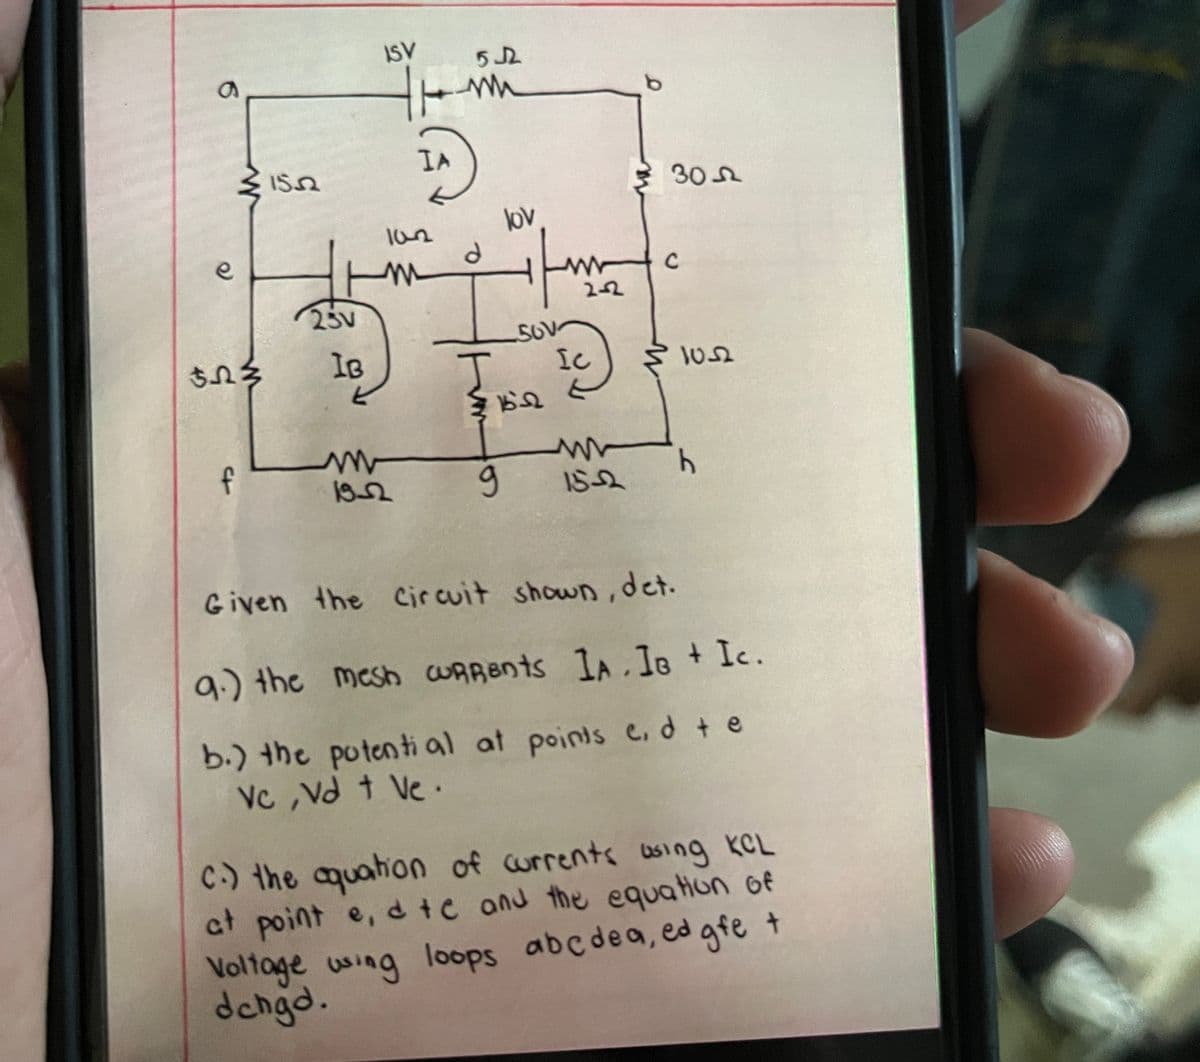 a
e
$53
f
1552
250
IB
5
ISV
IA
102
19-2
512
m
d
lov
-SOV
W 15-2
g
www Ho
IC
305
15-2
1052
b
Given the Circuit shown, det.
9.) the mesh CURRents IA. IB + Ic.
b.) the potential at points c, d te
Vc, Vd + Ve.
C.) the aquation of currents wing KCL
at point e, d tc and the equation of
Voltage using loops abcdea, ed gfe t
dehgd.